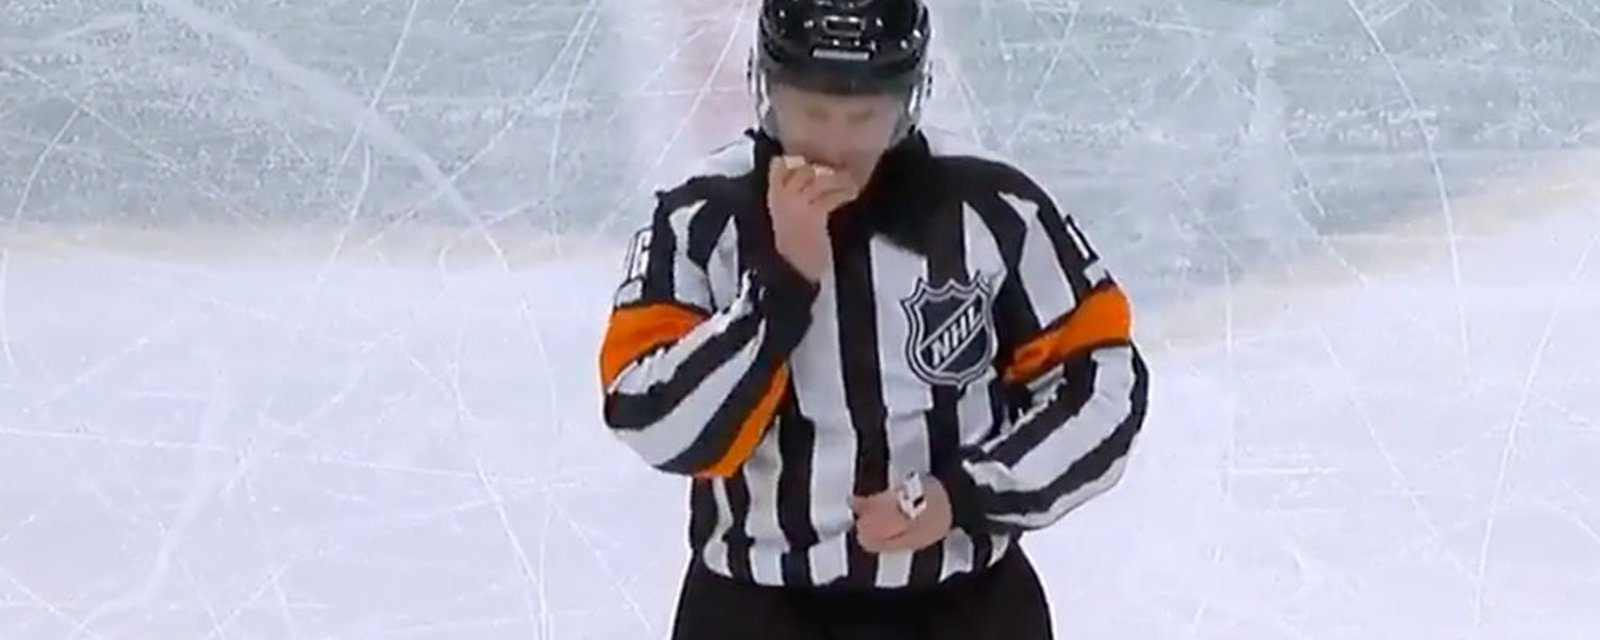 Referee Kelly Sutherland pops his teeth in before making penalty call